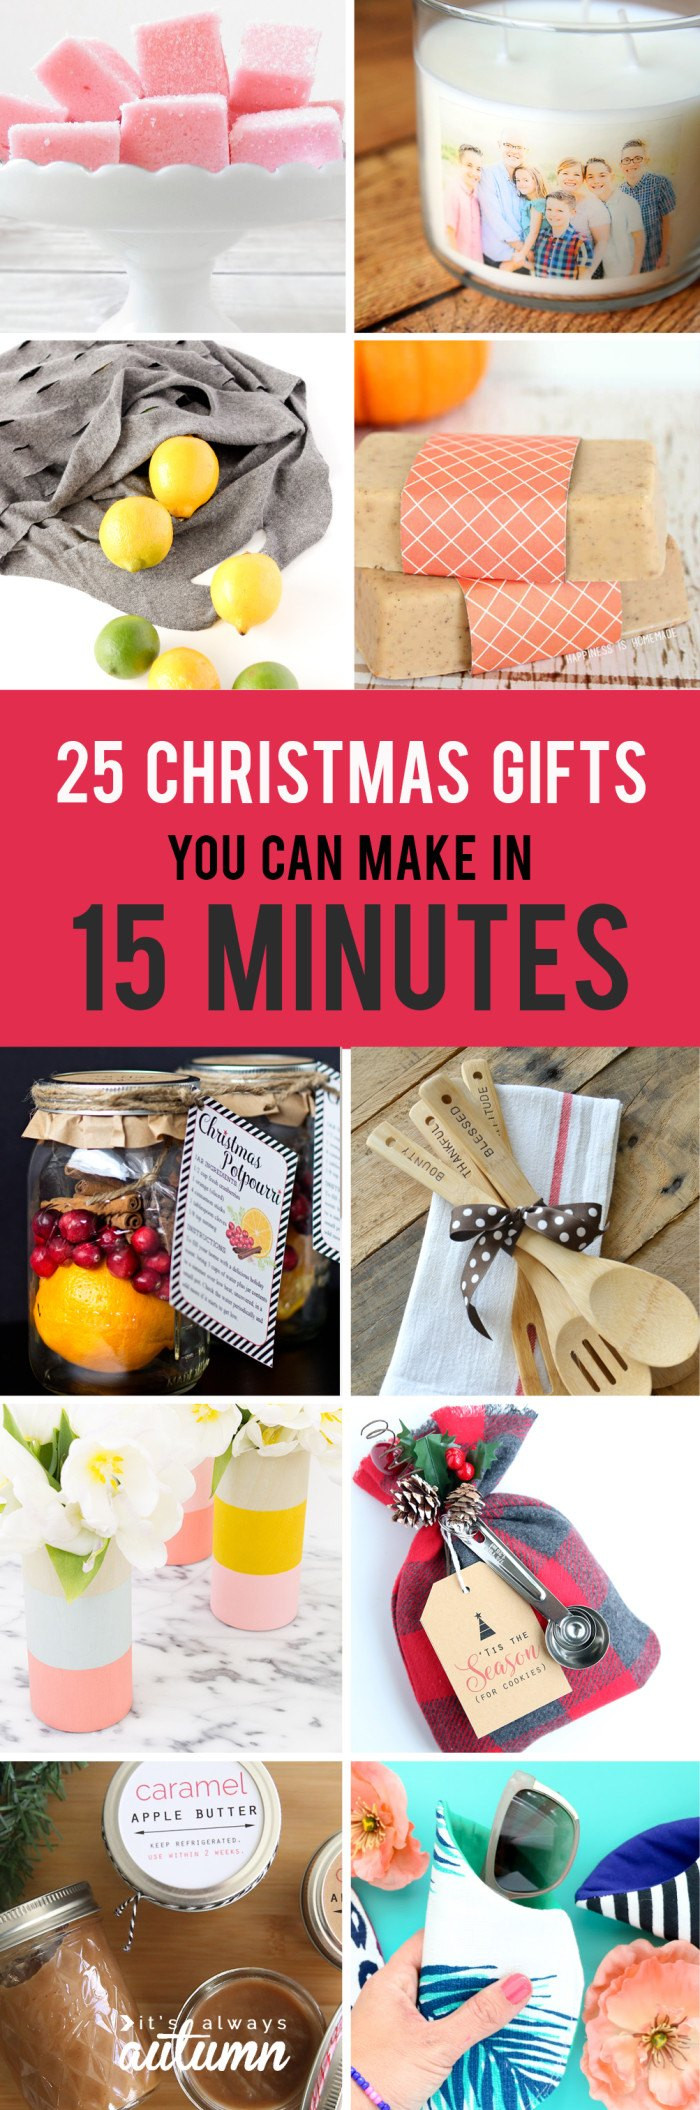 Making Christmas Gift
 25 Easy Christmas Gifts That You Can Make in 15 Minutes